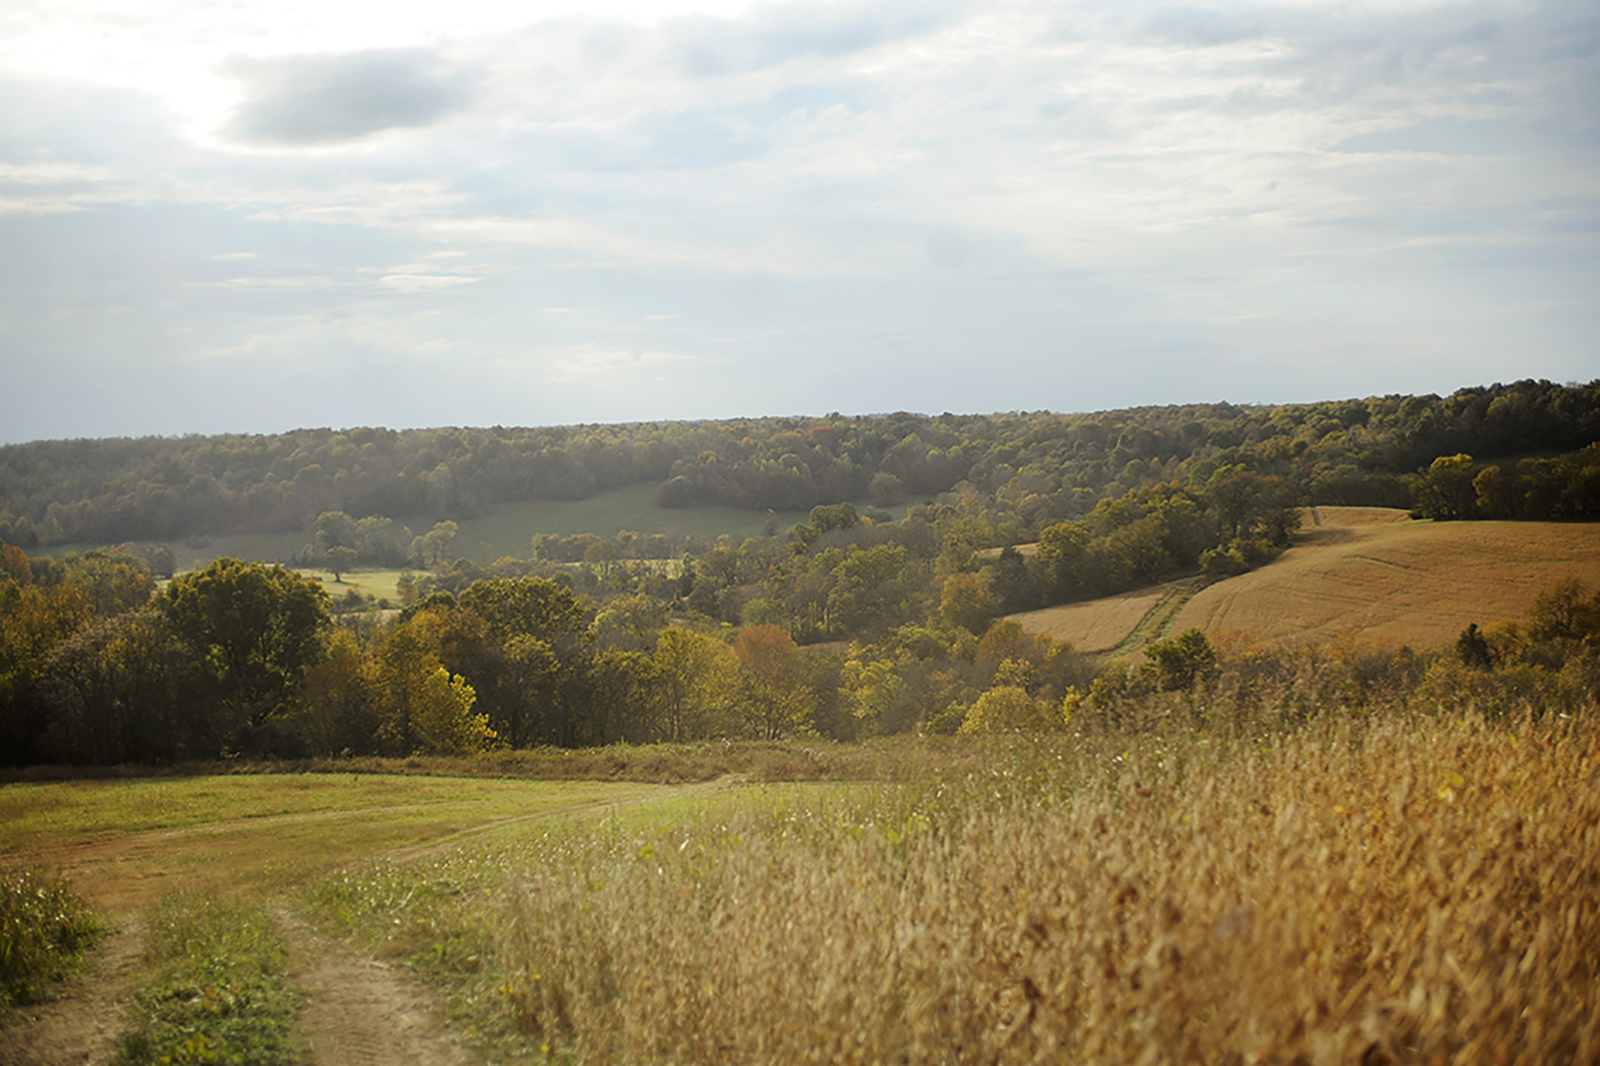 View of the surrounding autumn hills, trees, and fields around Milky Way Farm in Giles County, TN.